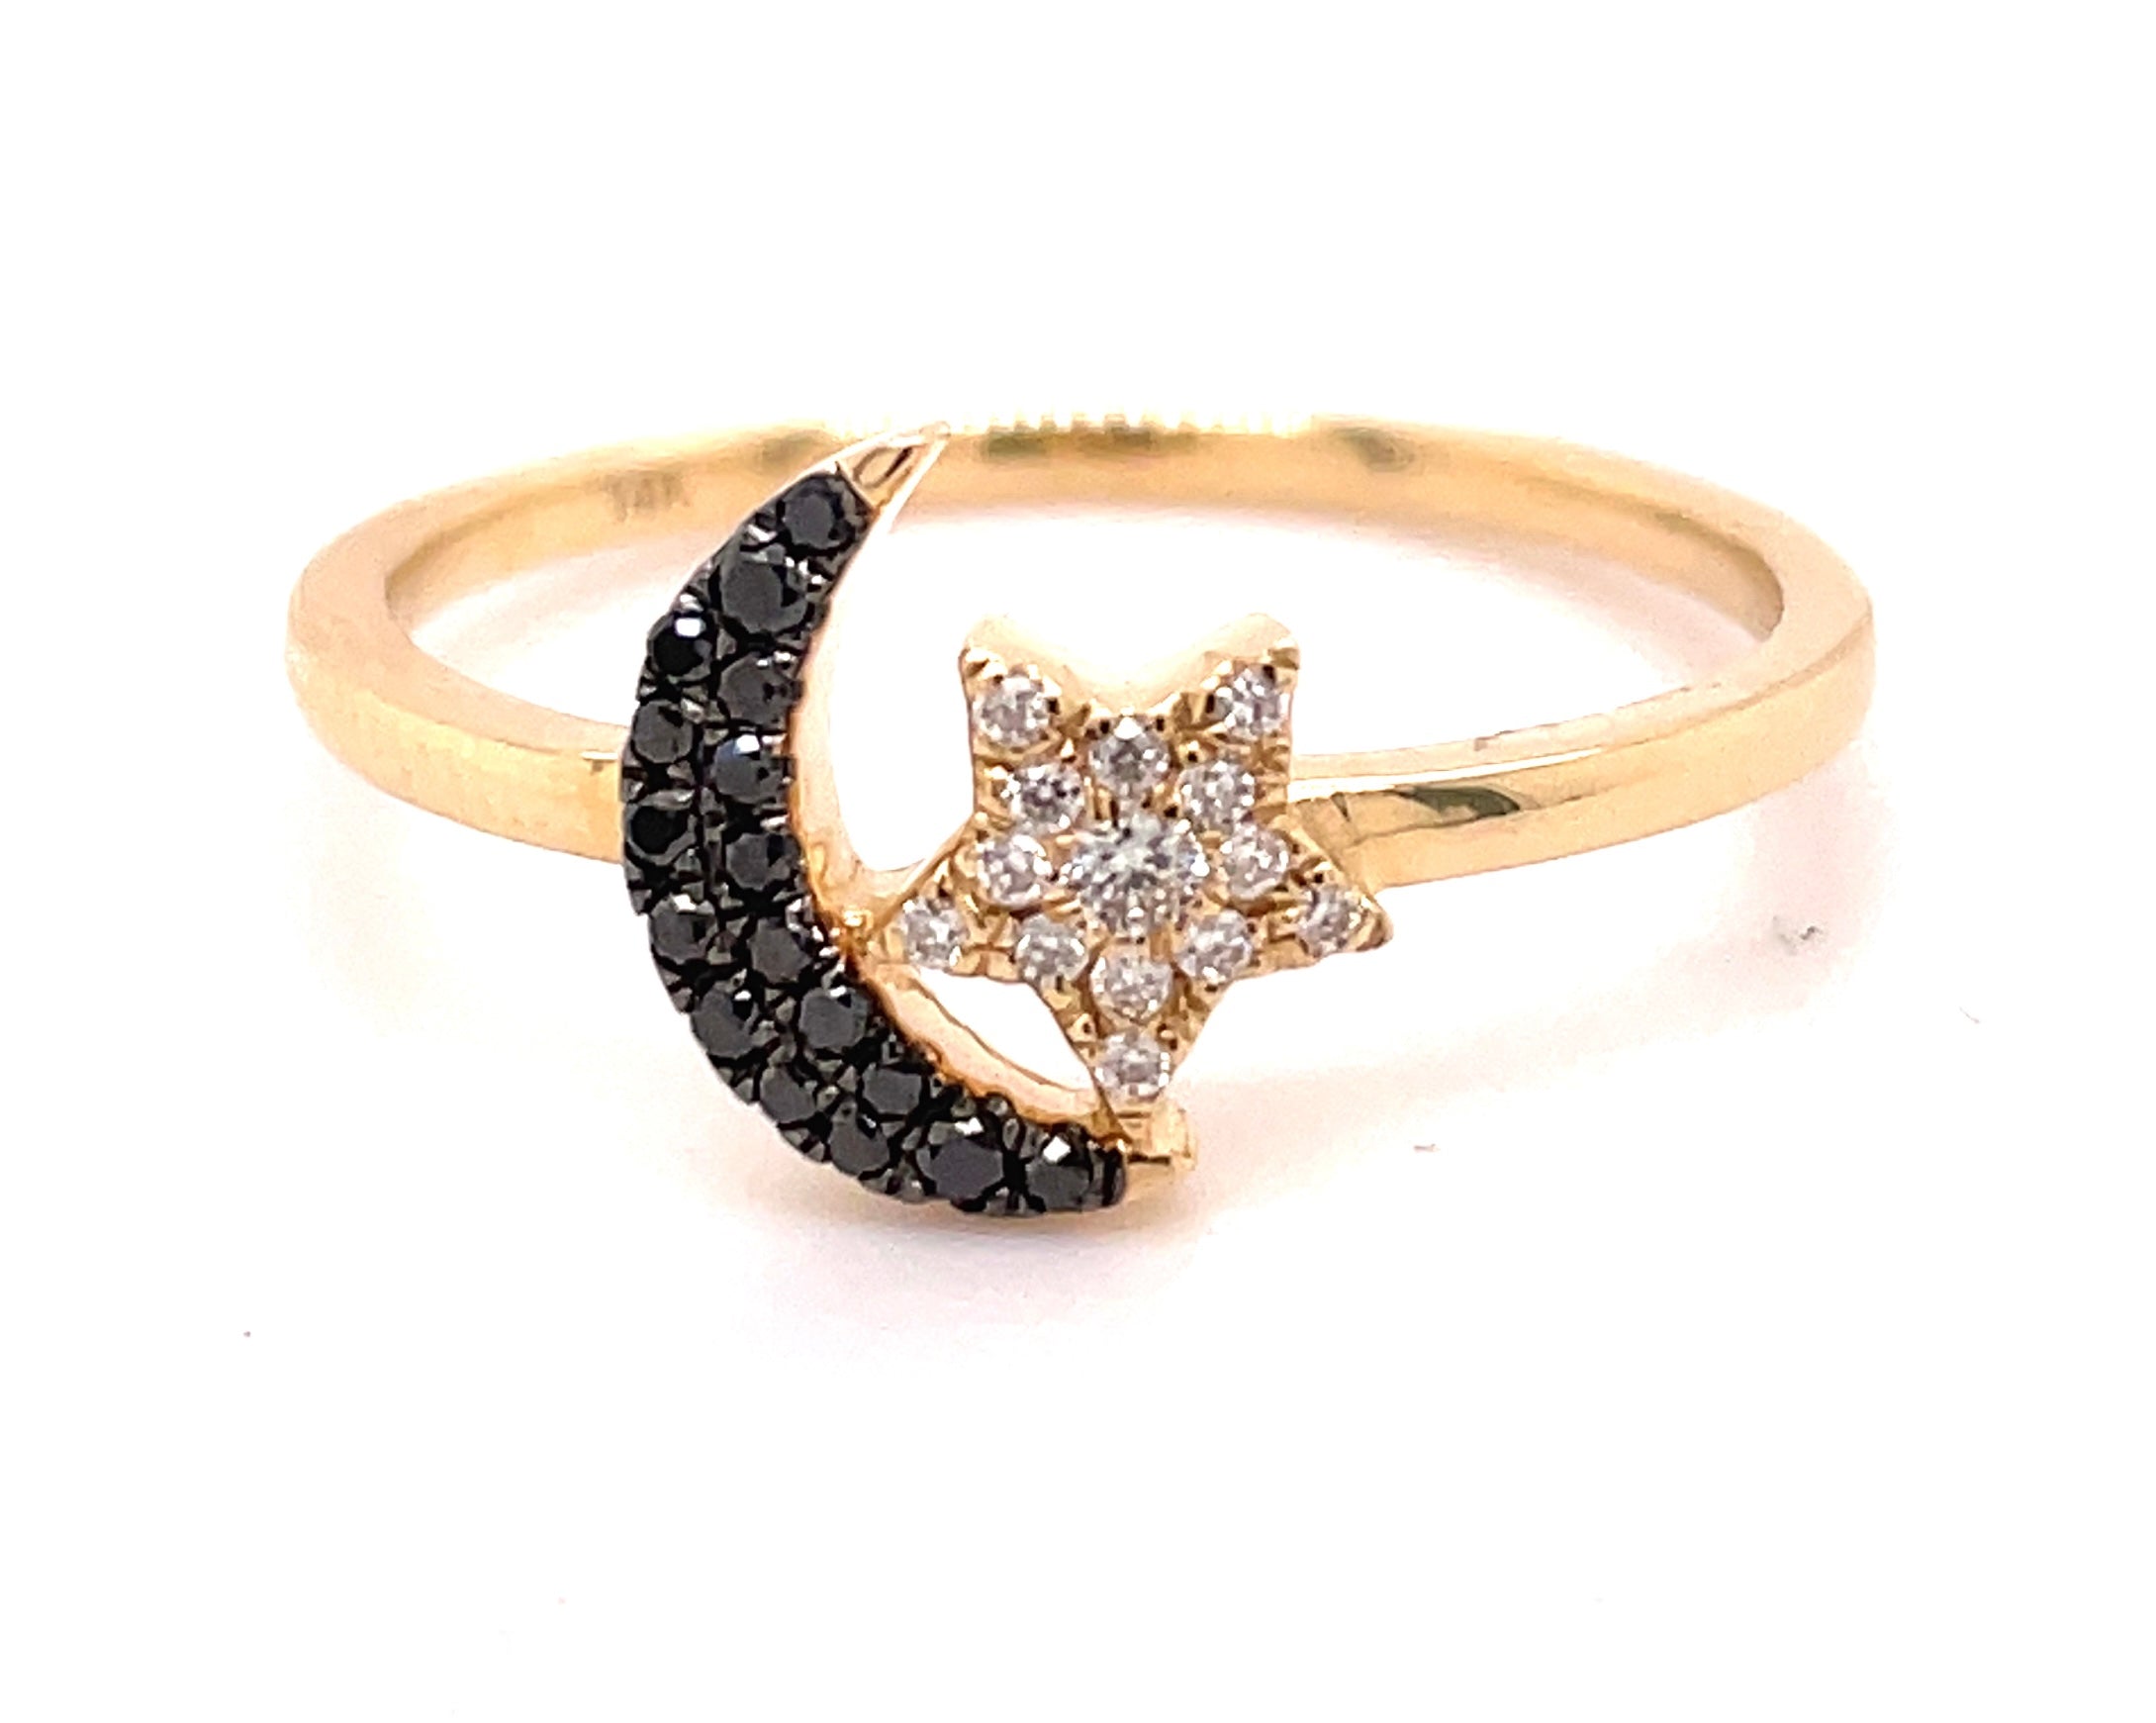 Crafted from 14k yellow gold, this ring features a moon and star design, decorated with 0.13 carats of round black diamonds.